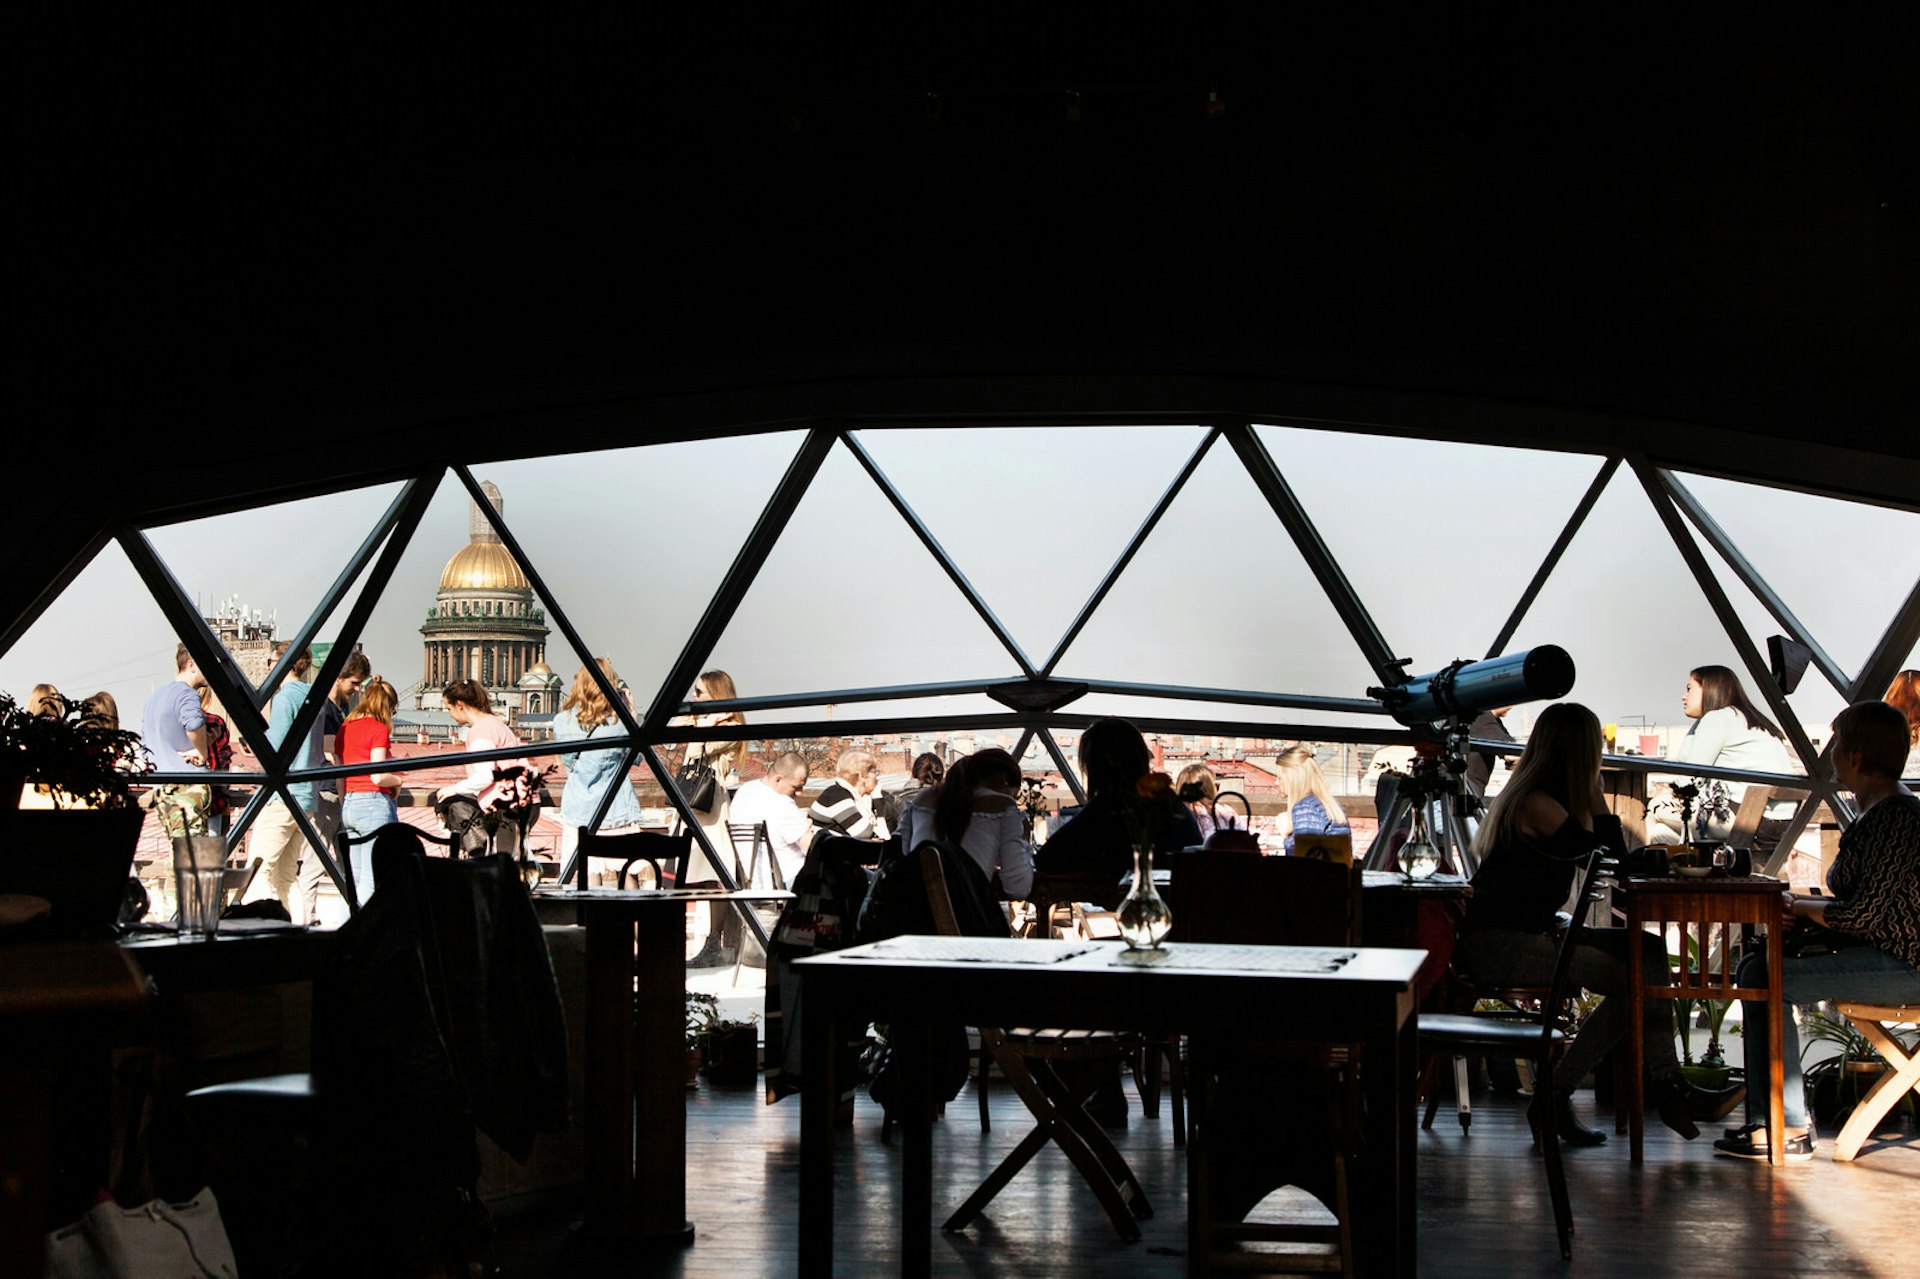 An interior of a rooftop cafe in St Peterburg, with a view of the city skyline through the windows